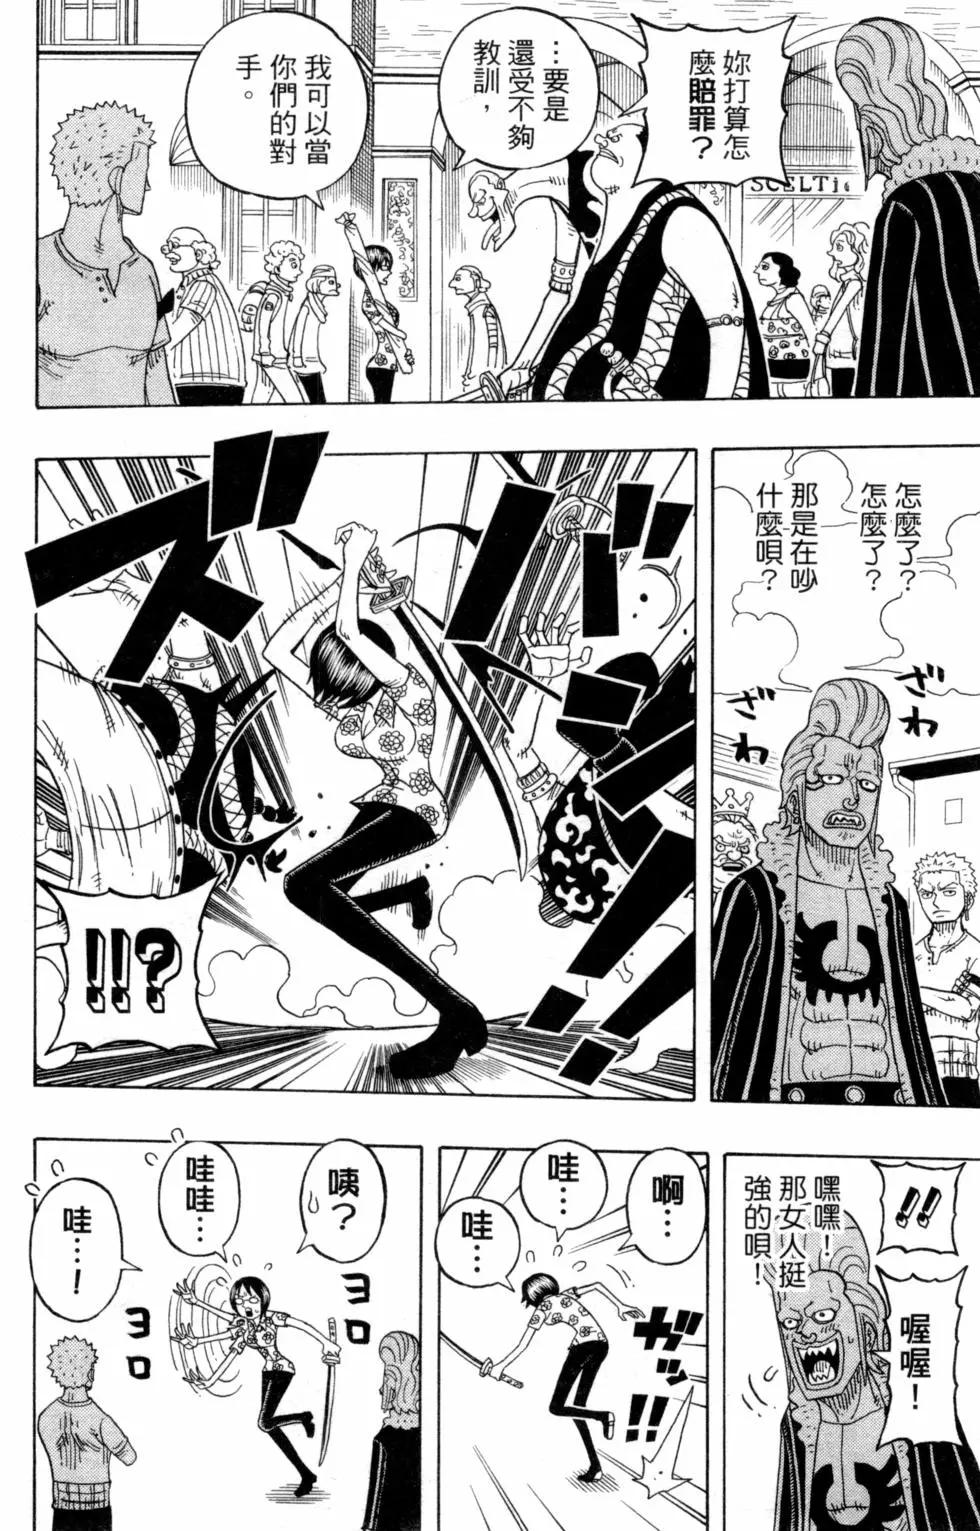 One piece party - 第06卷(2/4) - 3